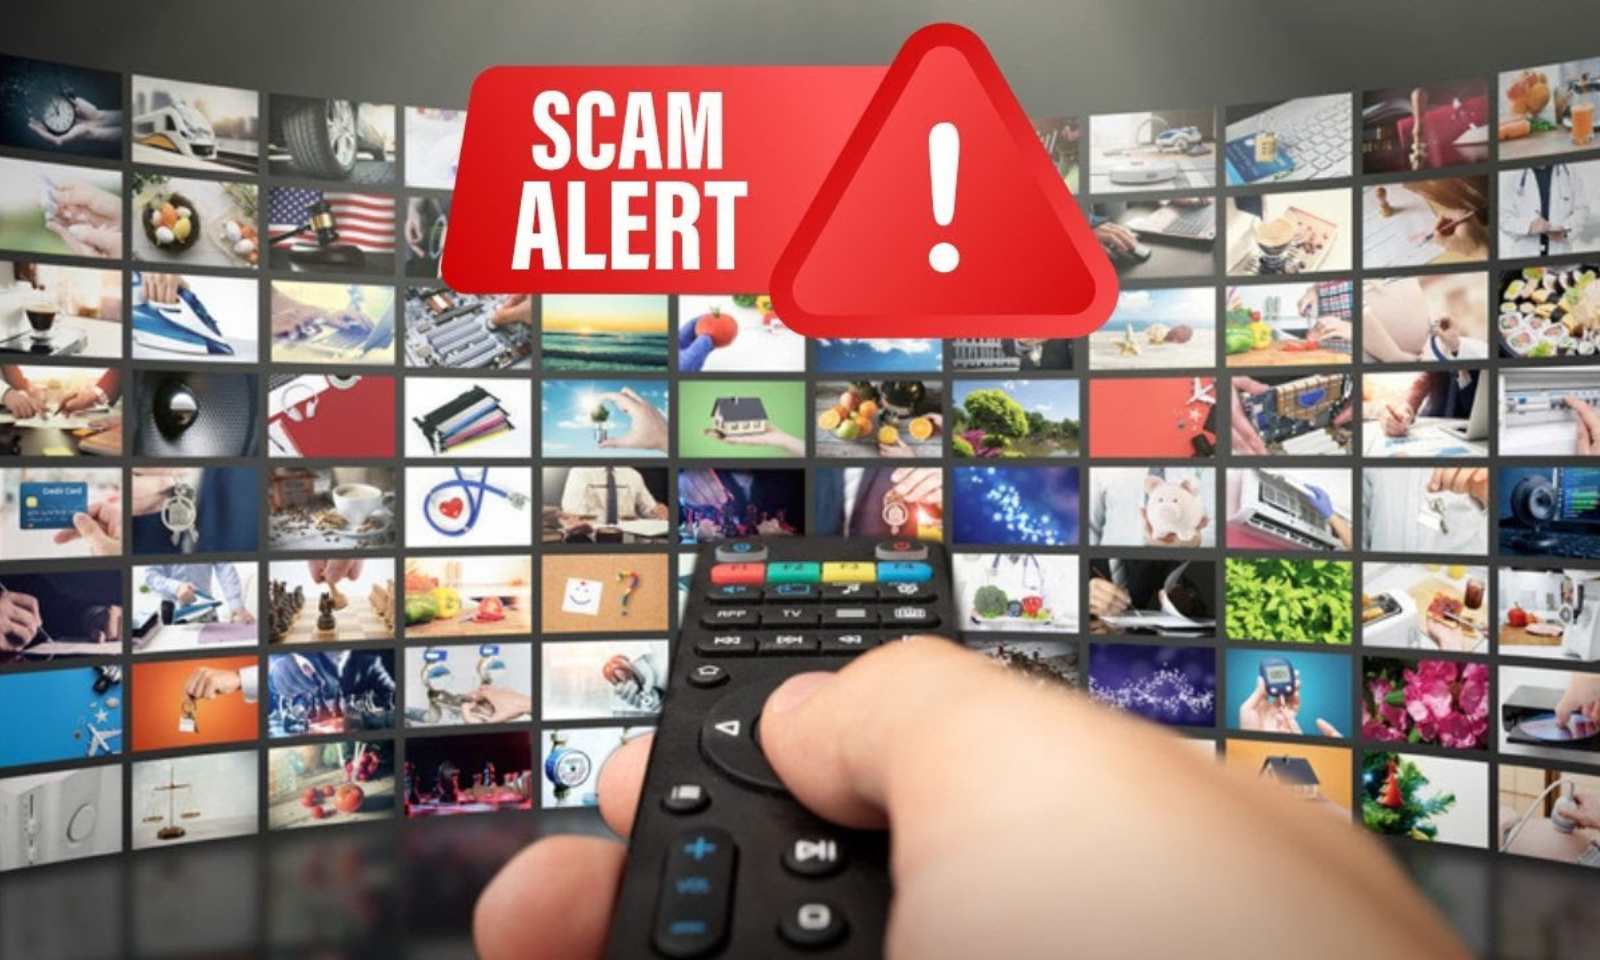 Star India's Cricket Content Hijacked! Agra Police Nabs Cyber Gang Behind Massive Live Streaming Fraud